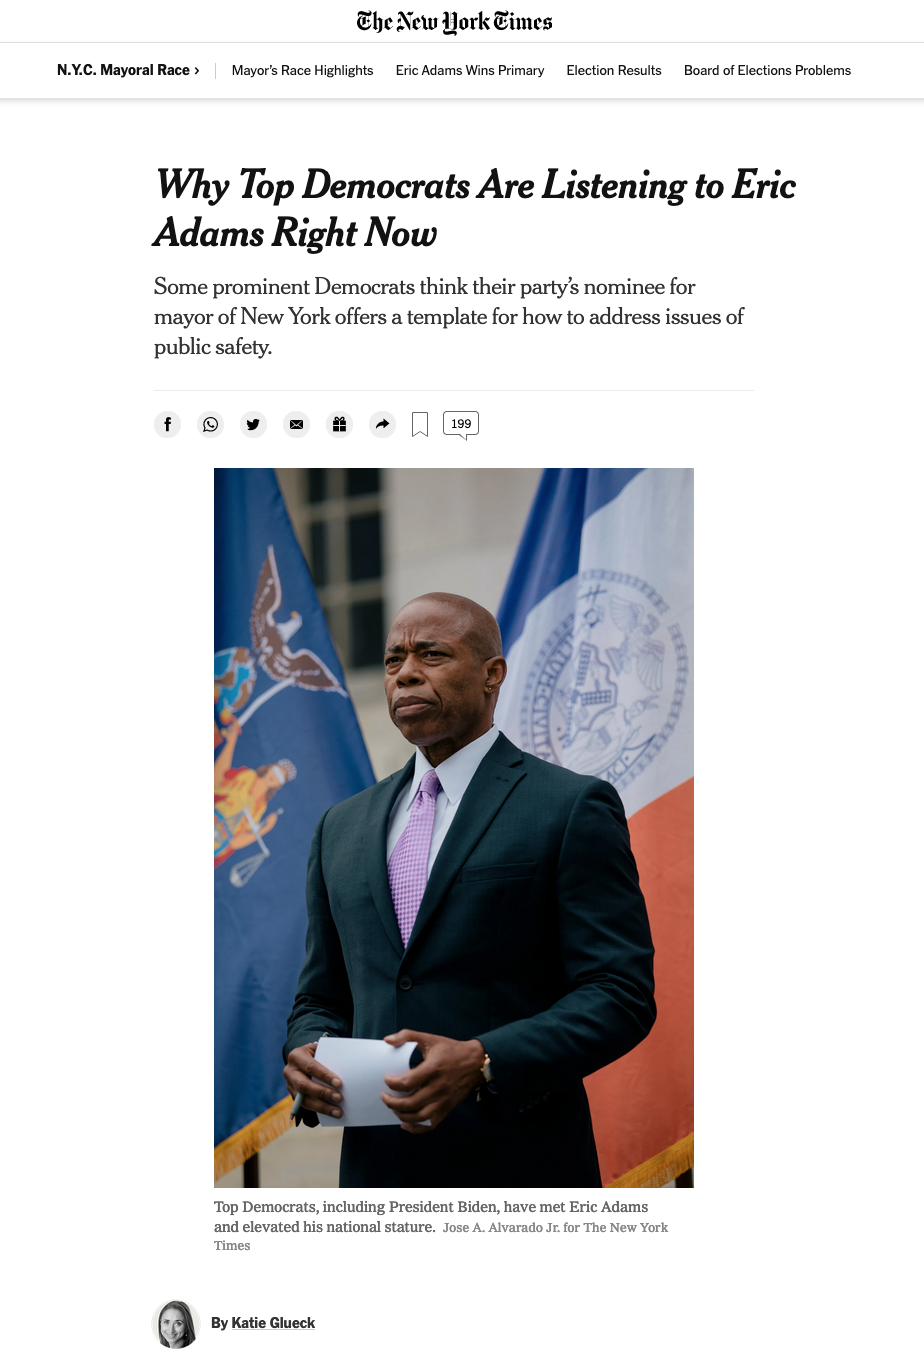 for The New York Times: Why Top Democrats Are Listening to Eric Adams Right Now